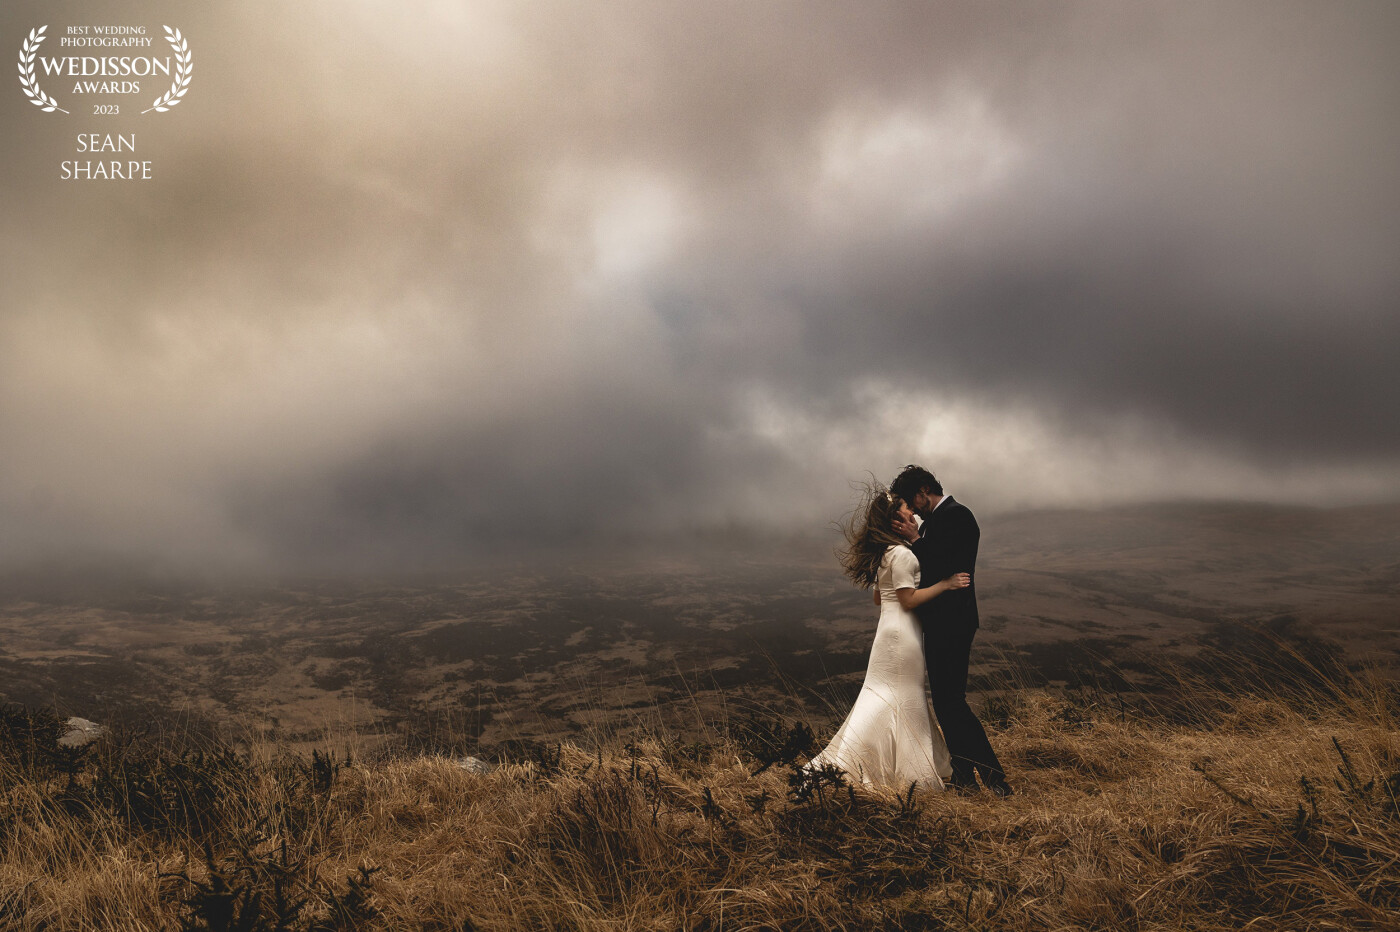 Fiona and Dónal. What a couple. What a sky. What a day! This shoot was everything and more I could’ve hoped for for my style. These two were just amazing to photograph on the day!